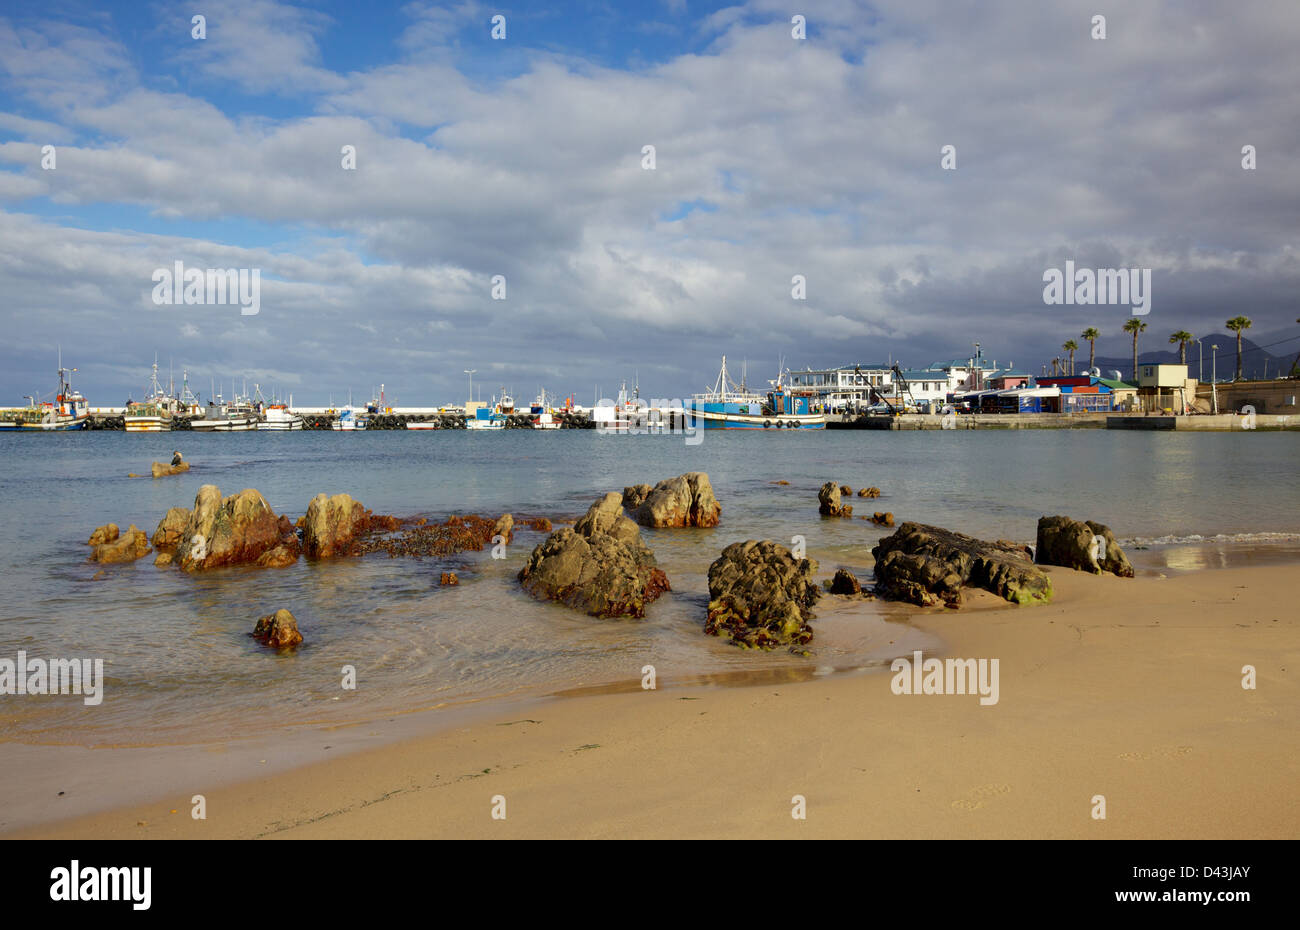 A pattern of rocks at Kalk Bay Harbour Beach, near Cape Town in South Africa. Stock Photo